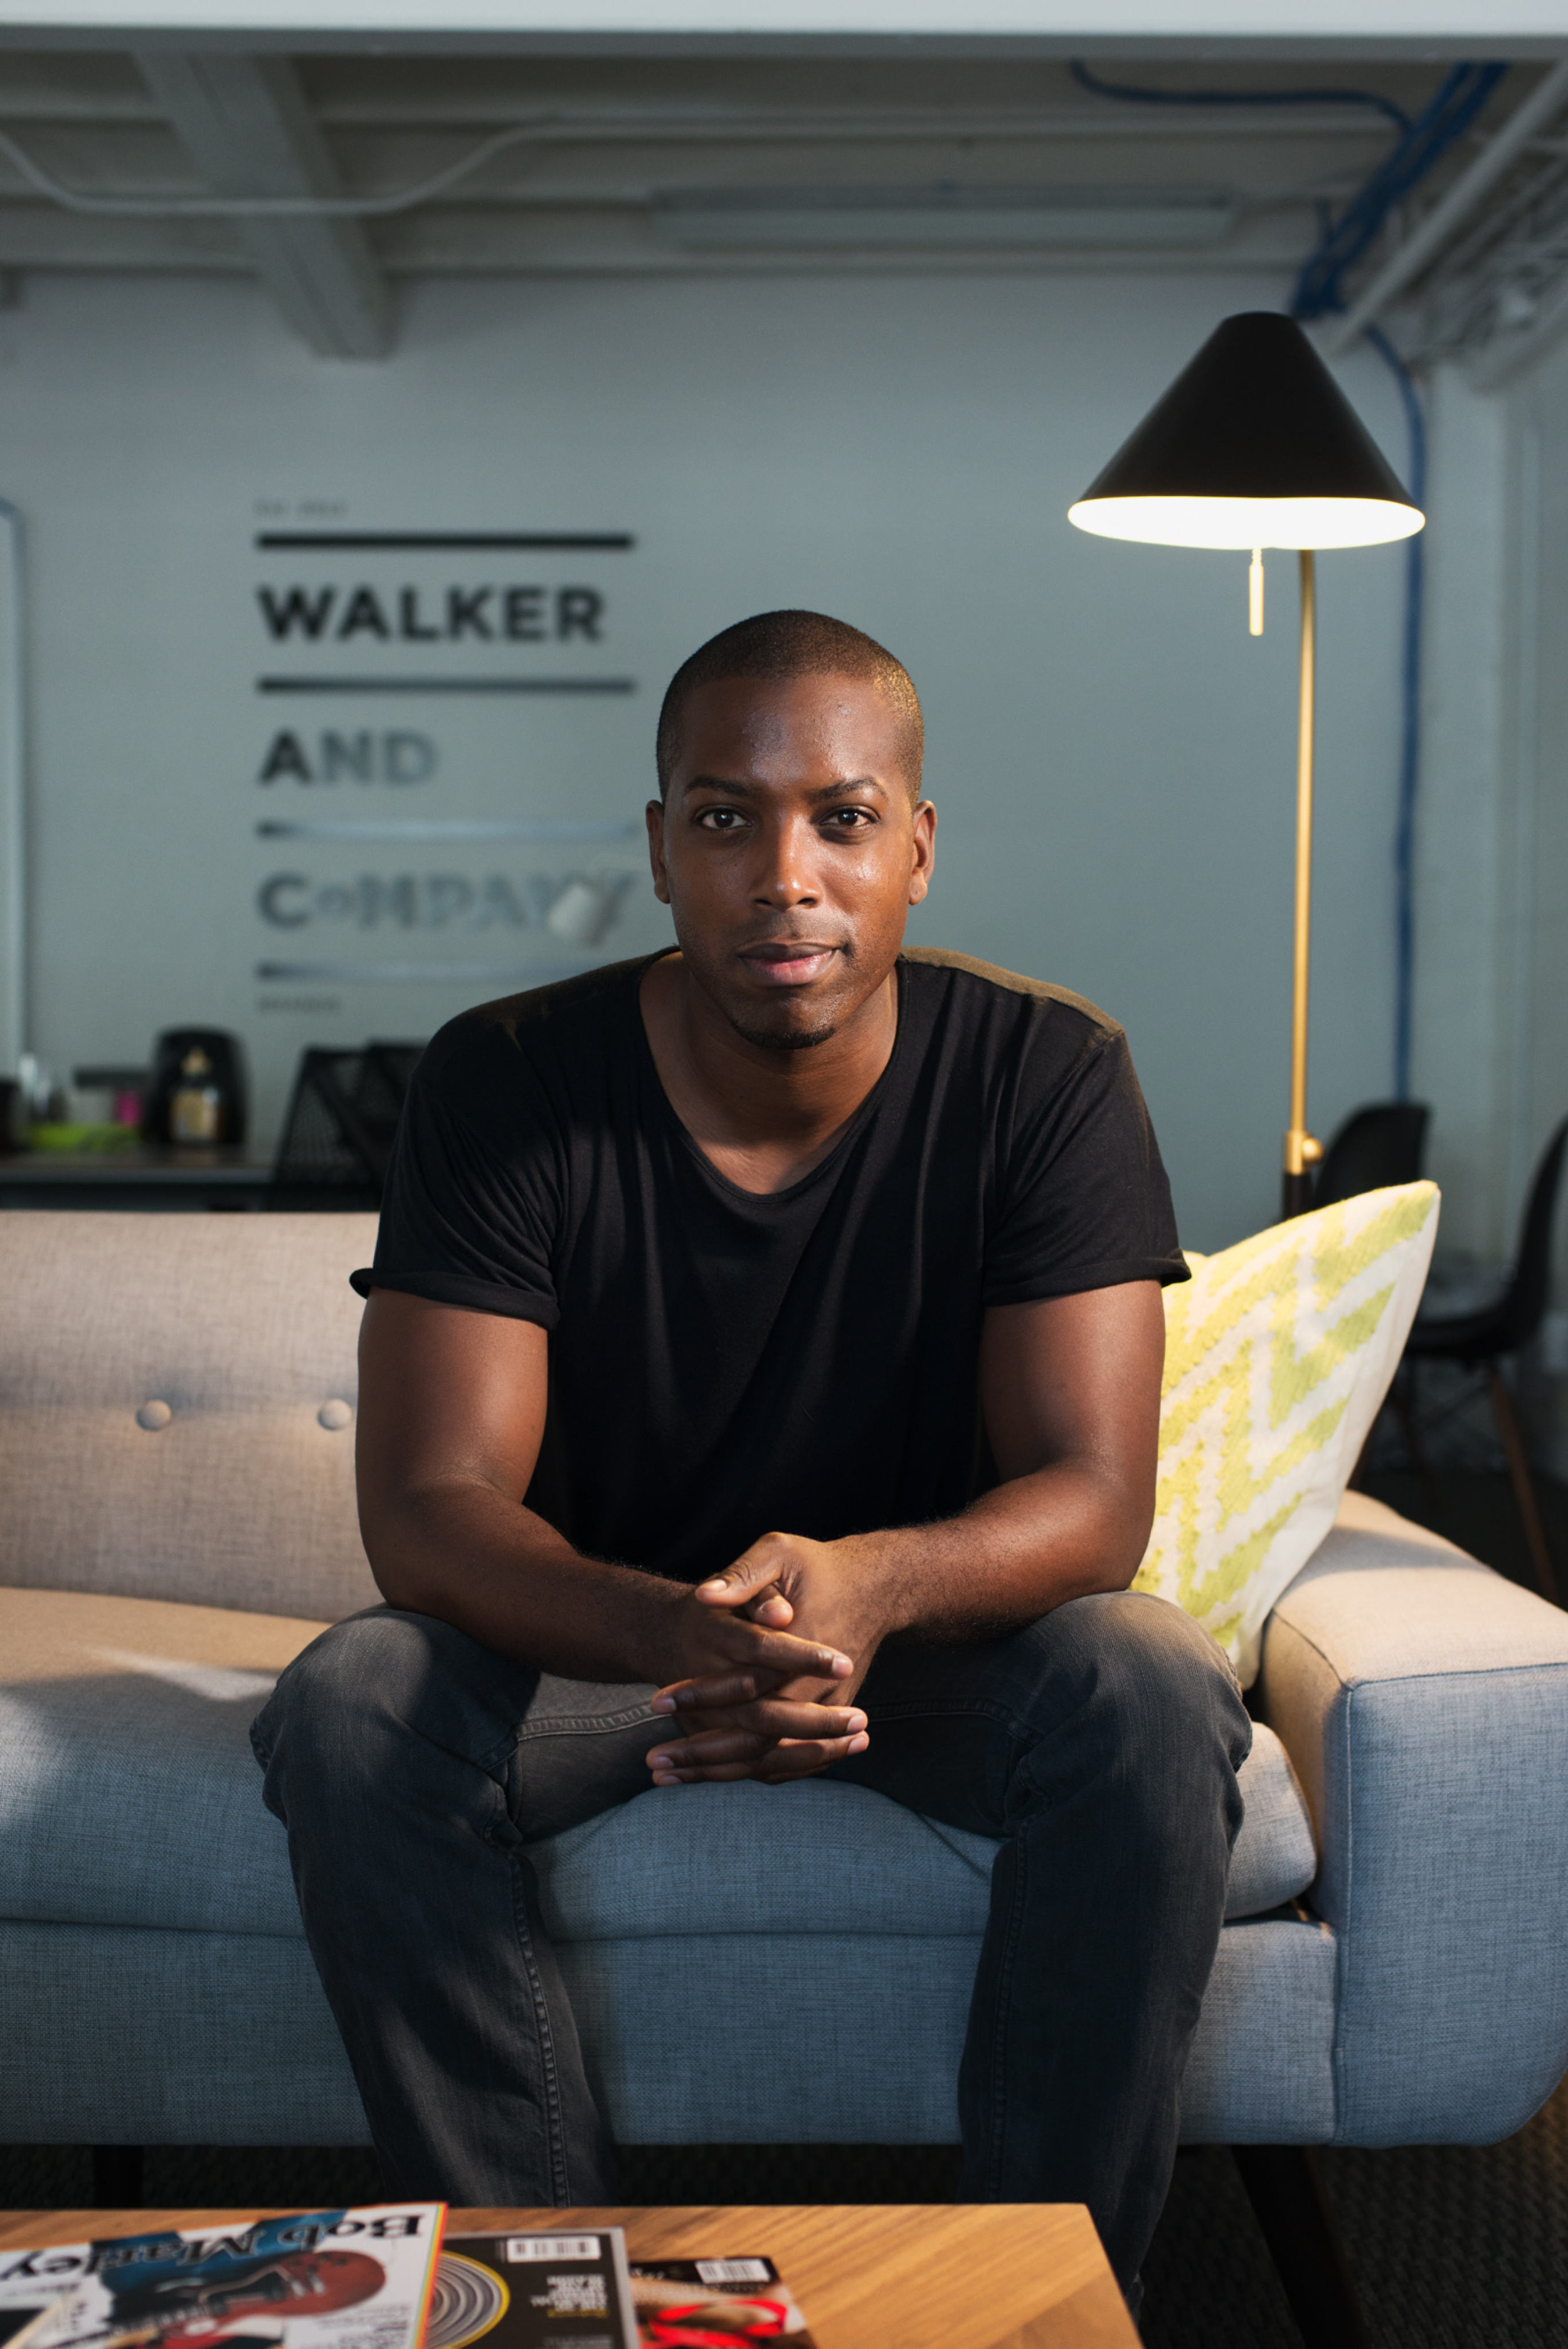   Profile on Tristan Walker, an African-American entrepreneur known for being the head of business development at Foursquare and an advocate for racial diversity in the Silicon Valley Tech world. Now he's focusing on his start-up Walker and Co., whic